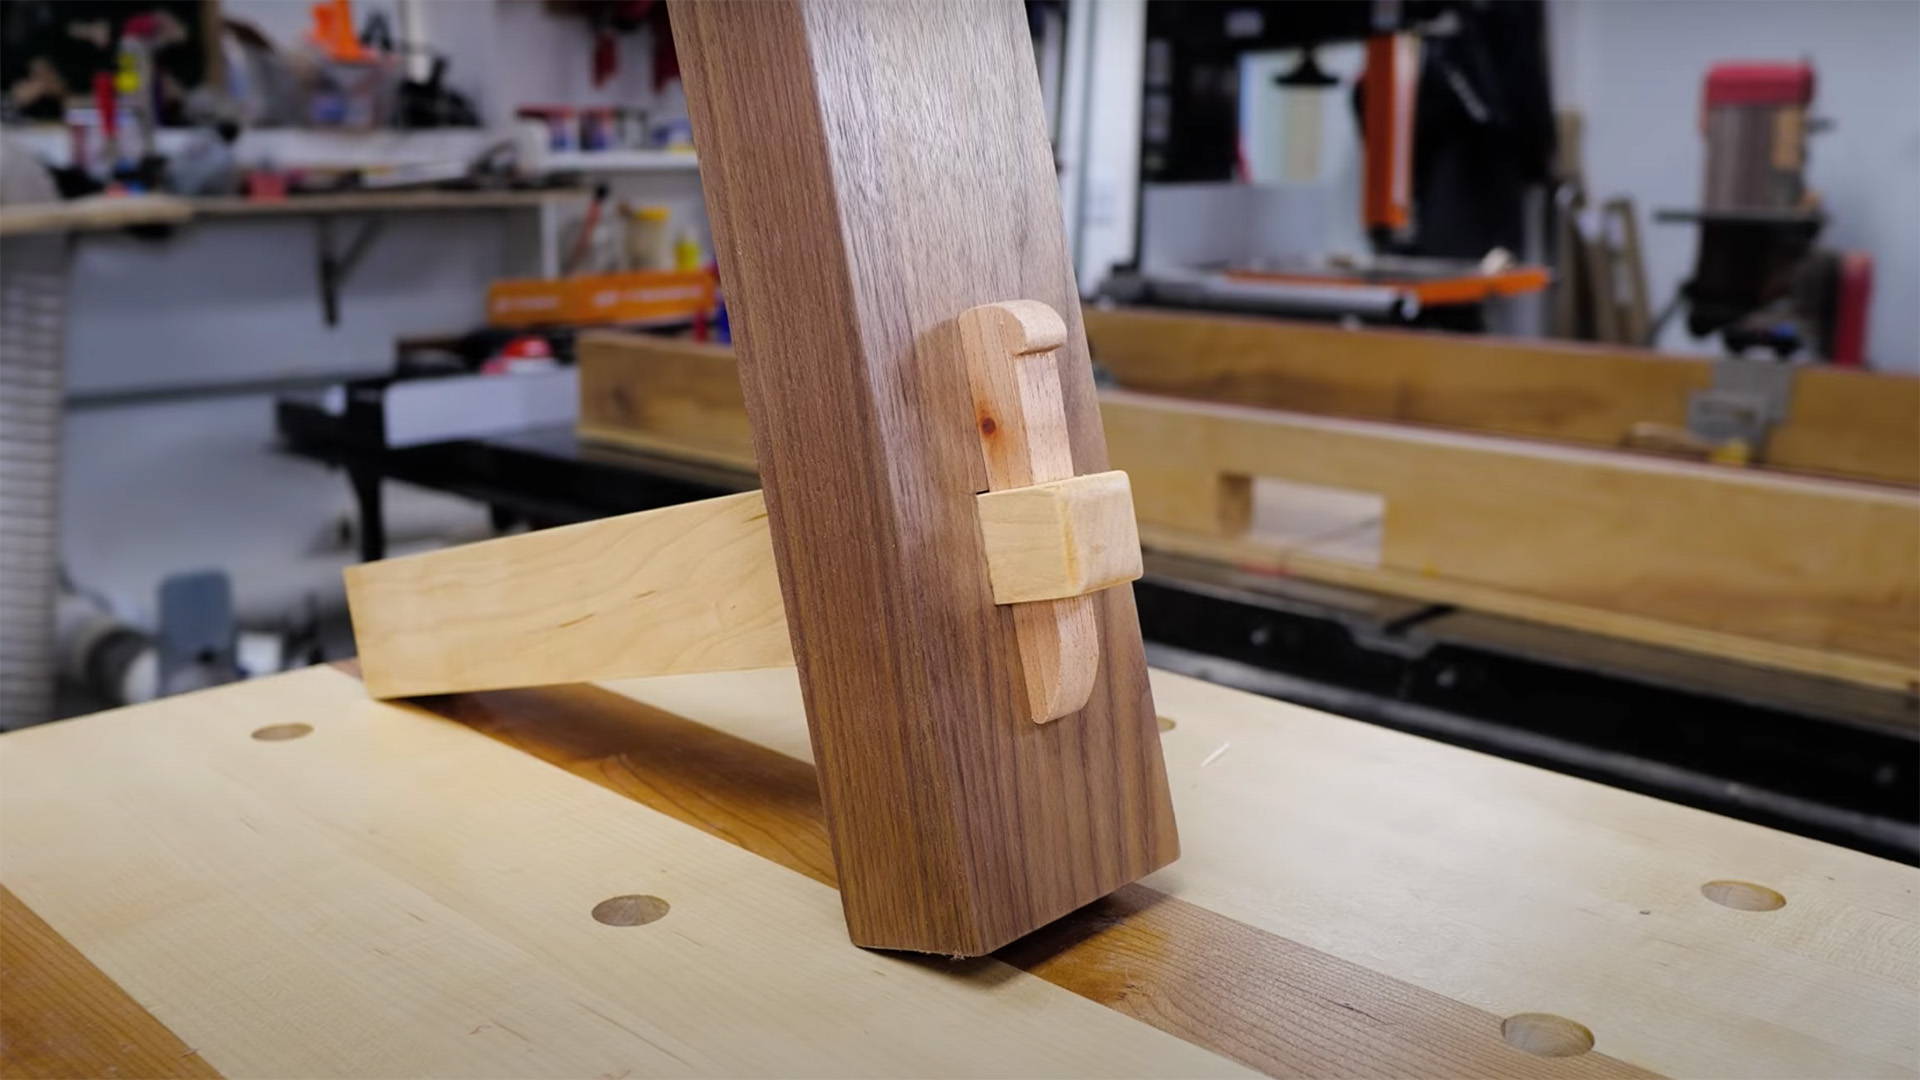 Tusked mortise and tenon